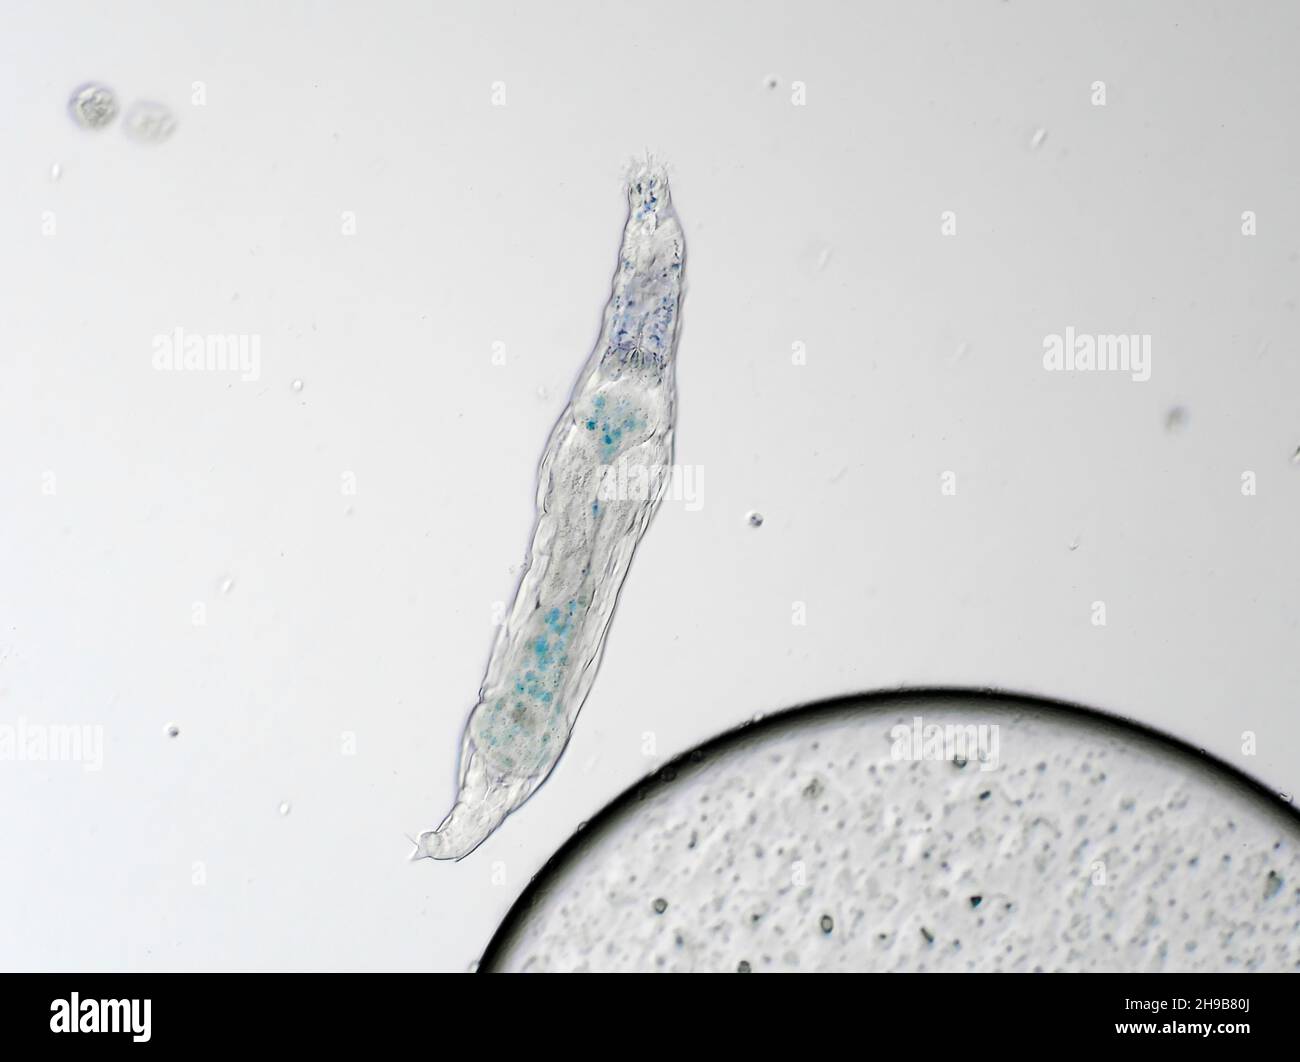 Bdelloid rotifer from a soil sample, horizontal field of view is about 0.55mm Stock Photo